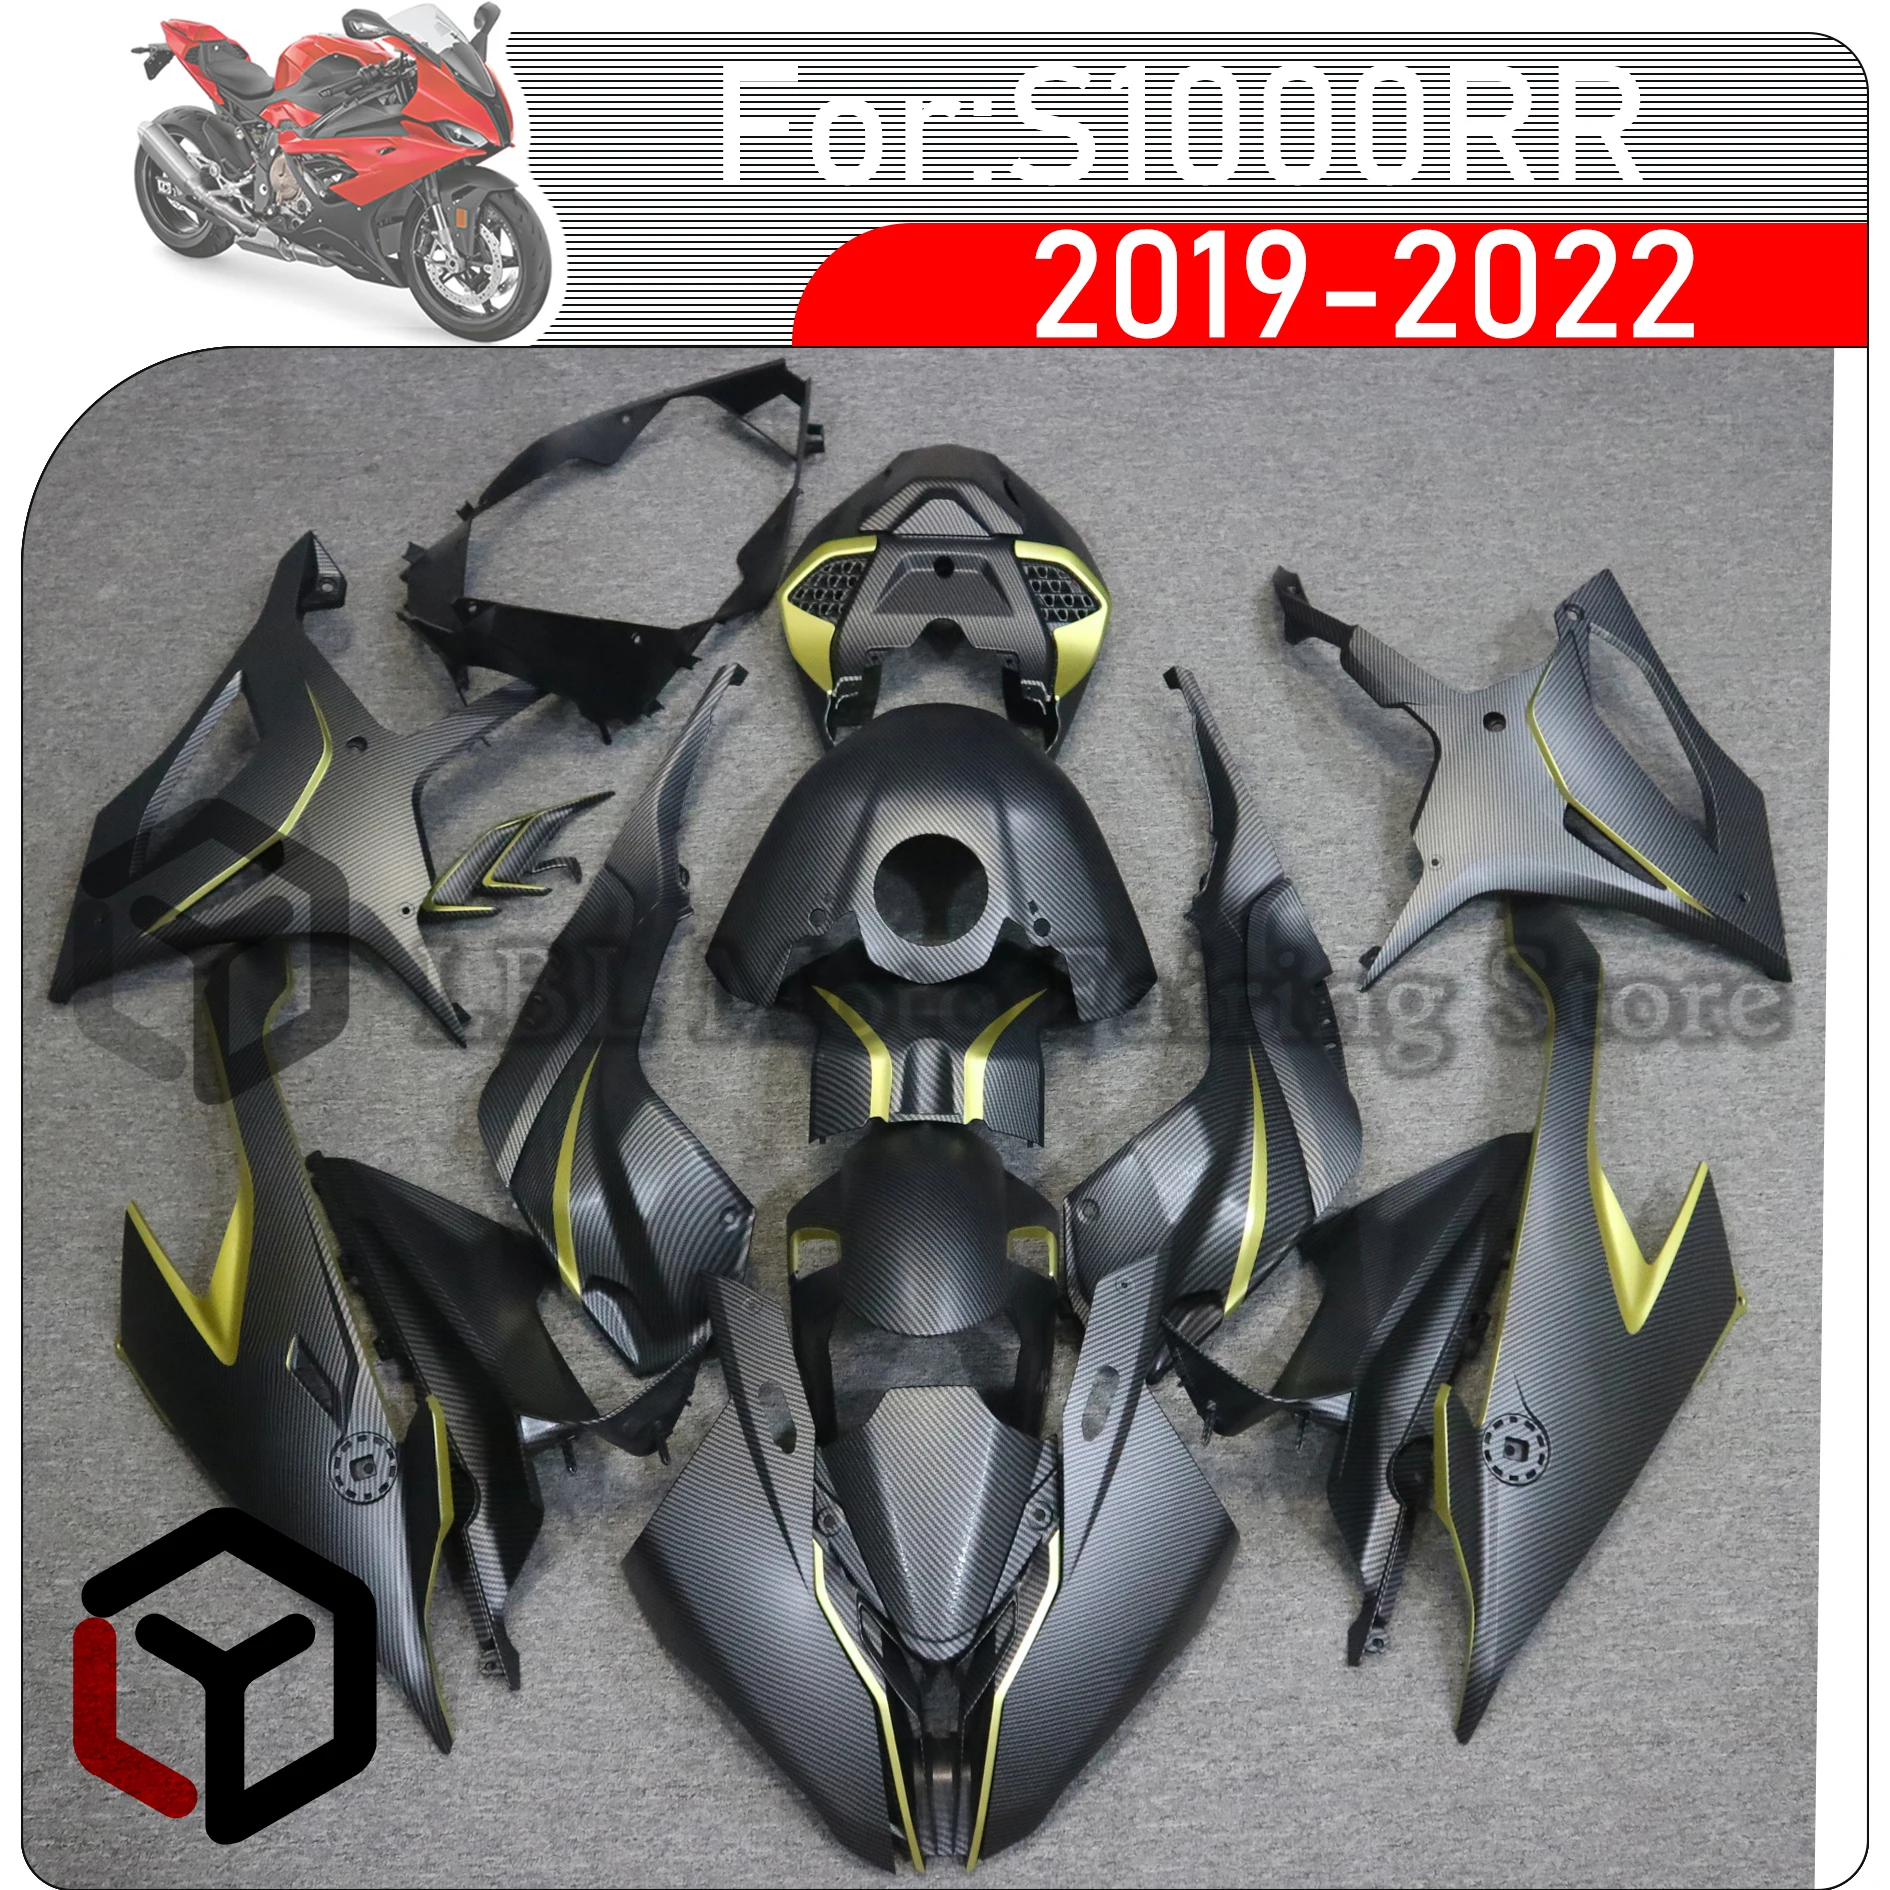 

For BMW S 1000RR S1000 RR S1000rr 2019 2020 2021 2022 Motorcycle Fairings Injection Mold Painted ABS Plastic Bodywork Kit Sets